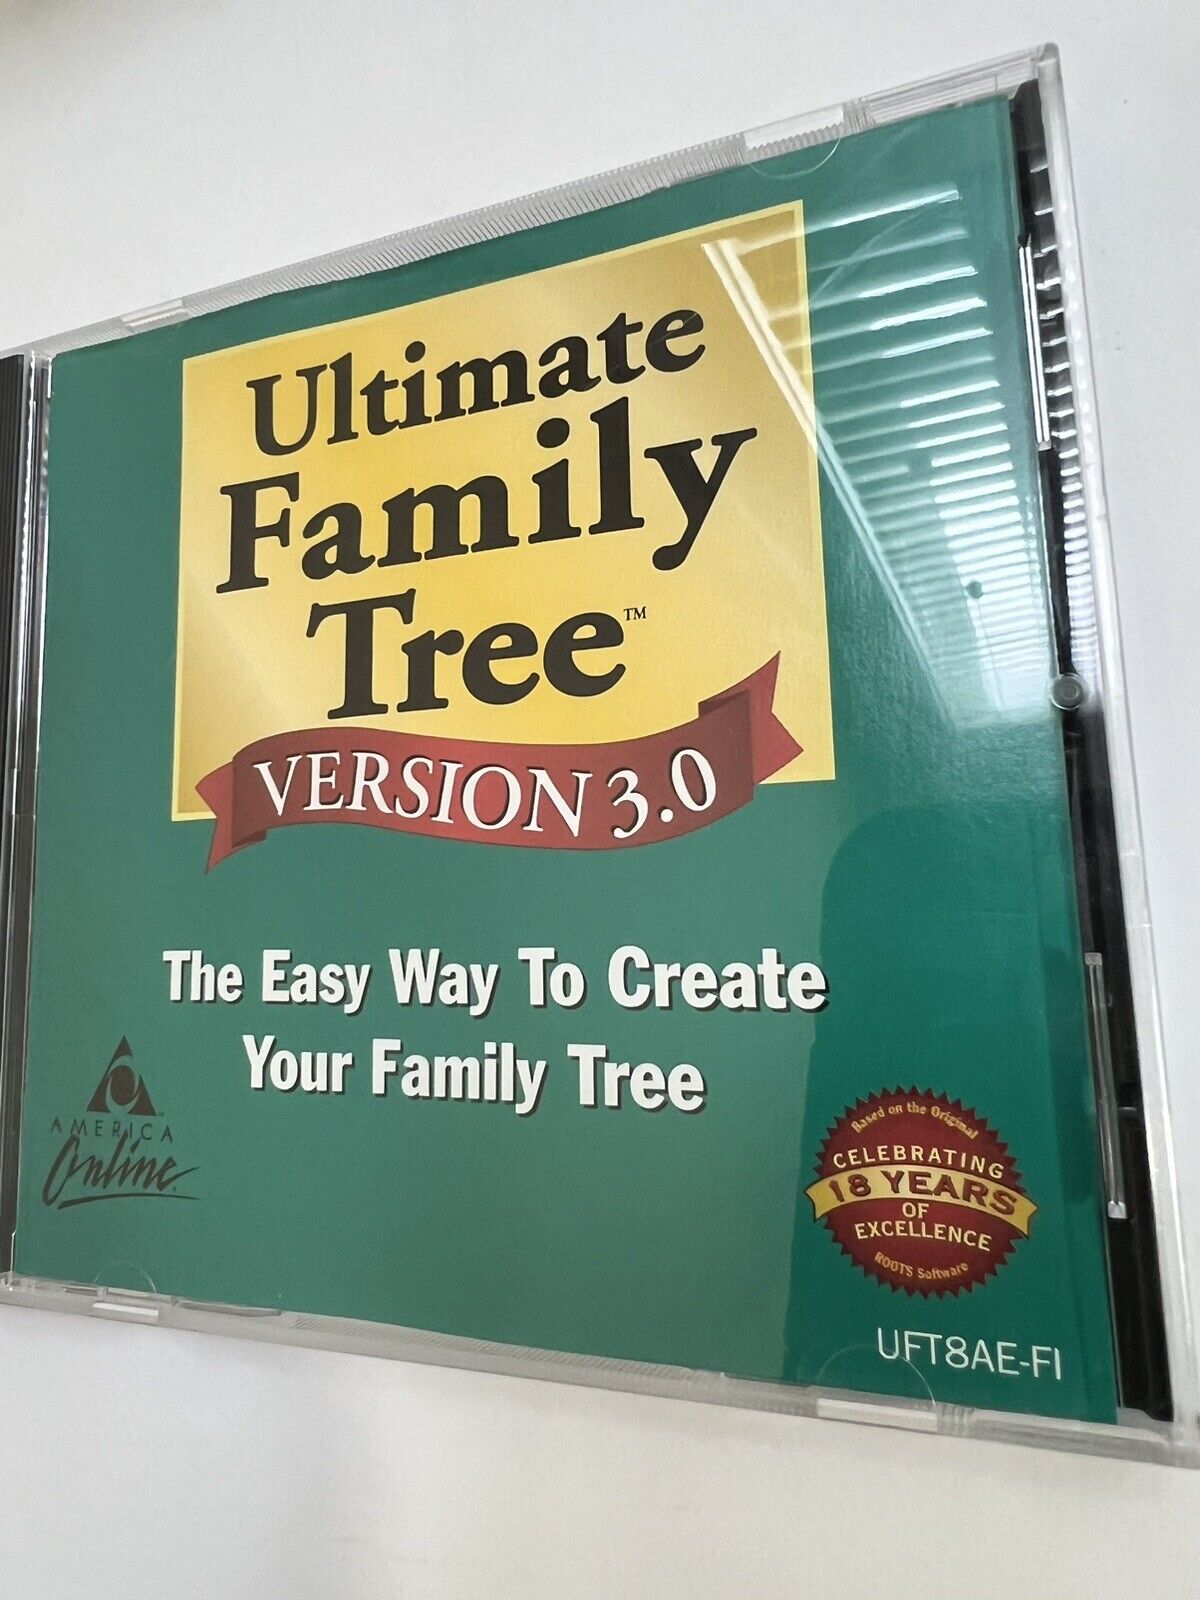 Vintage CD Rom for Ultimate Family Tree, Version 3. by The Learning Company 1999